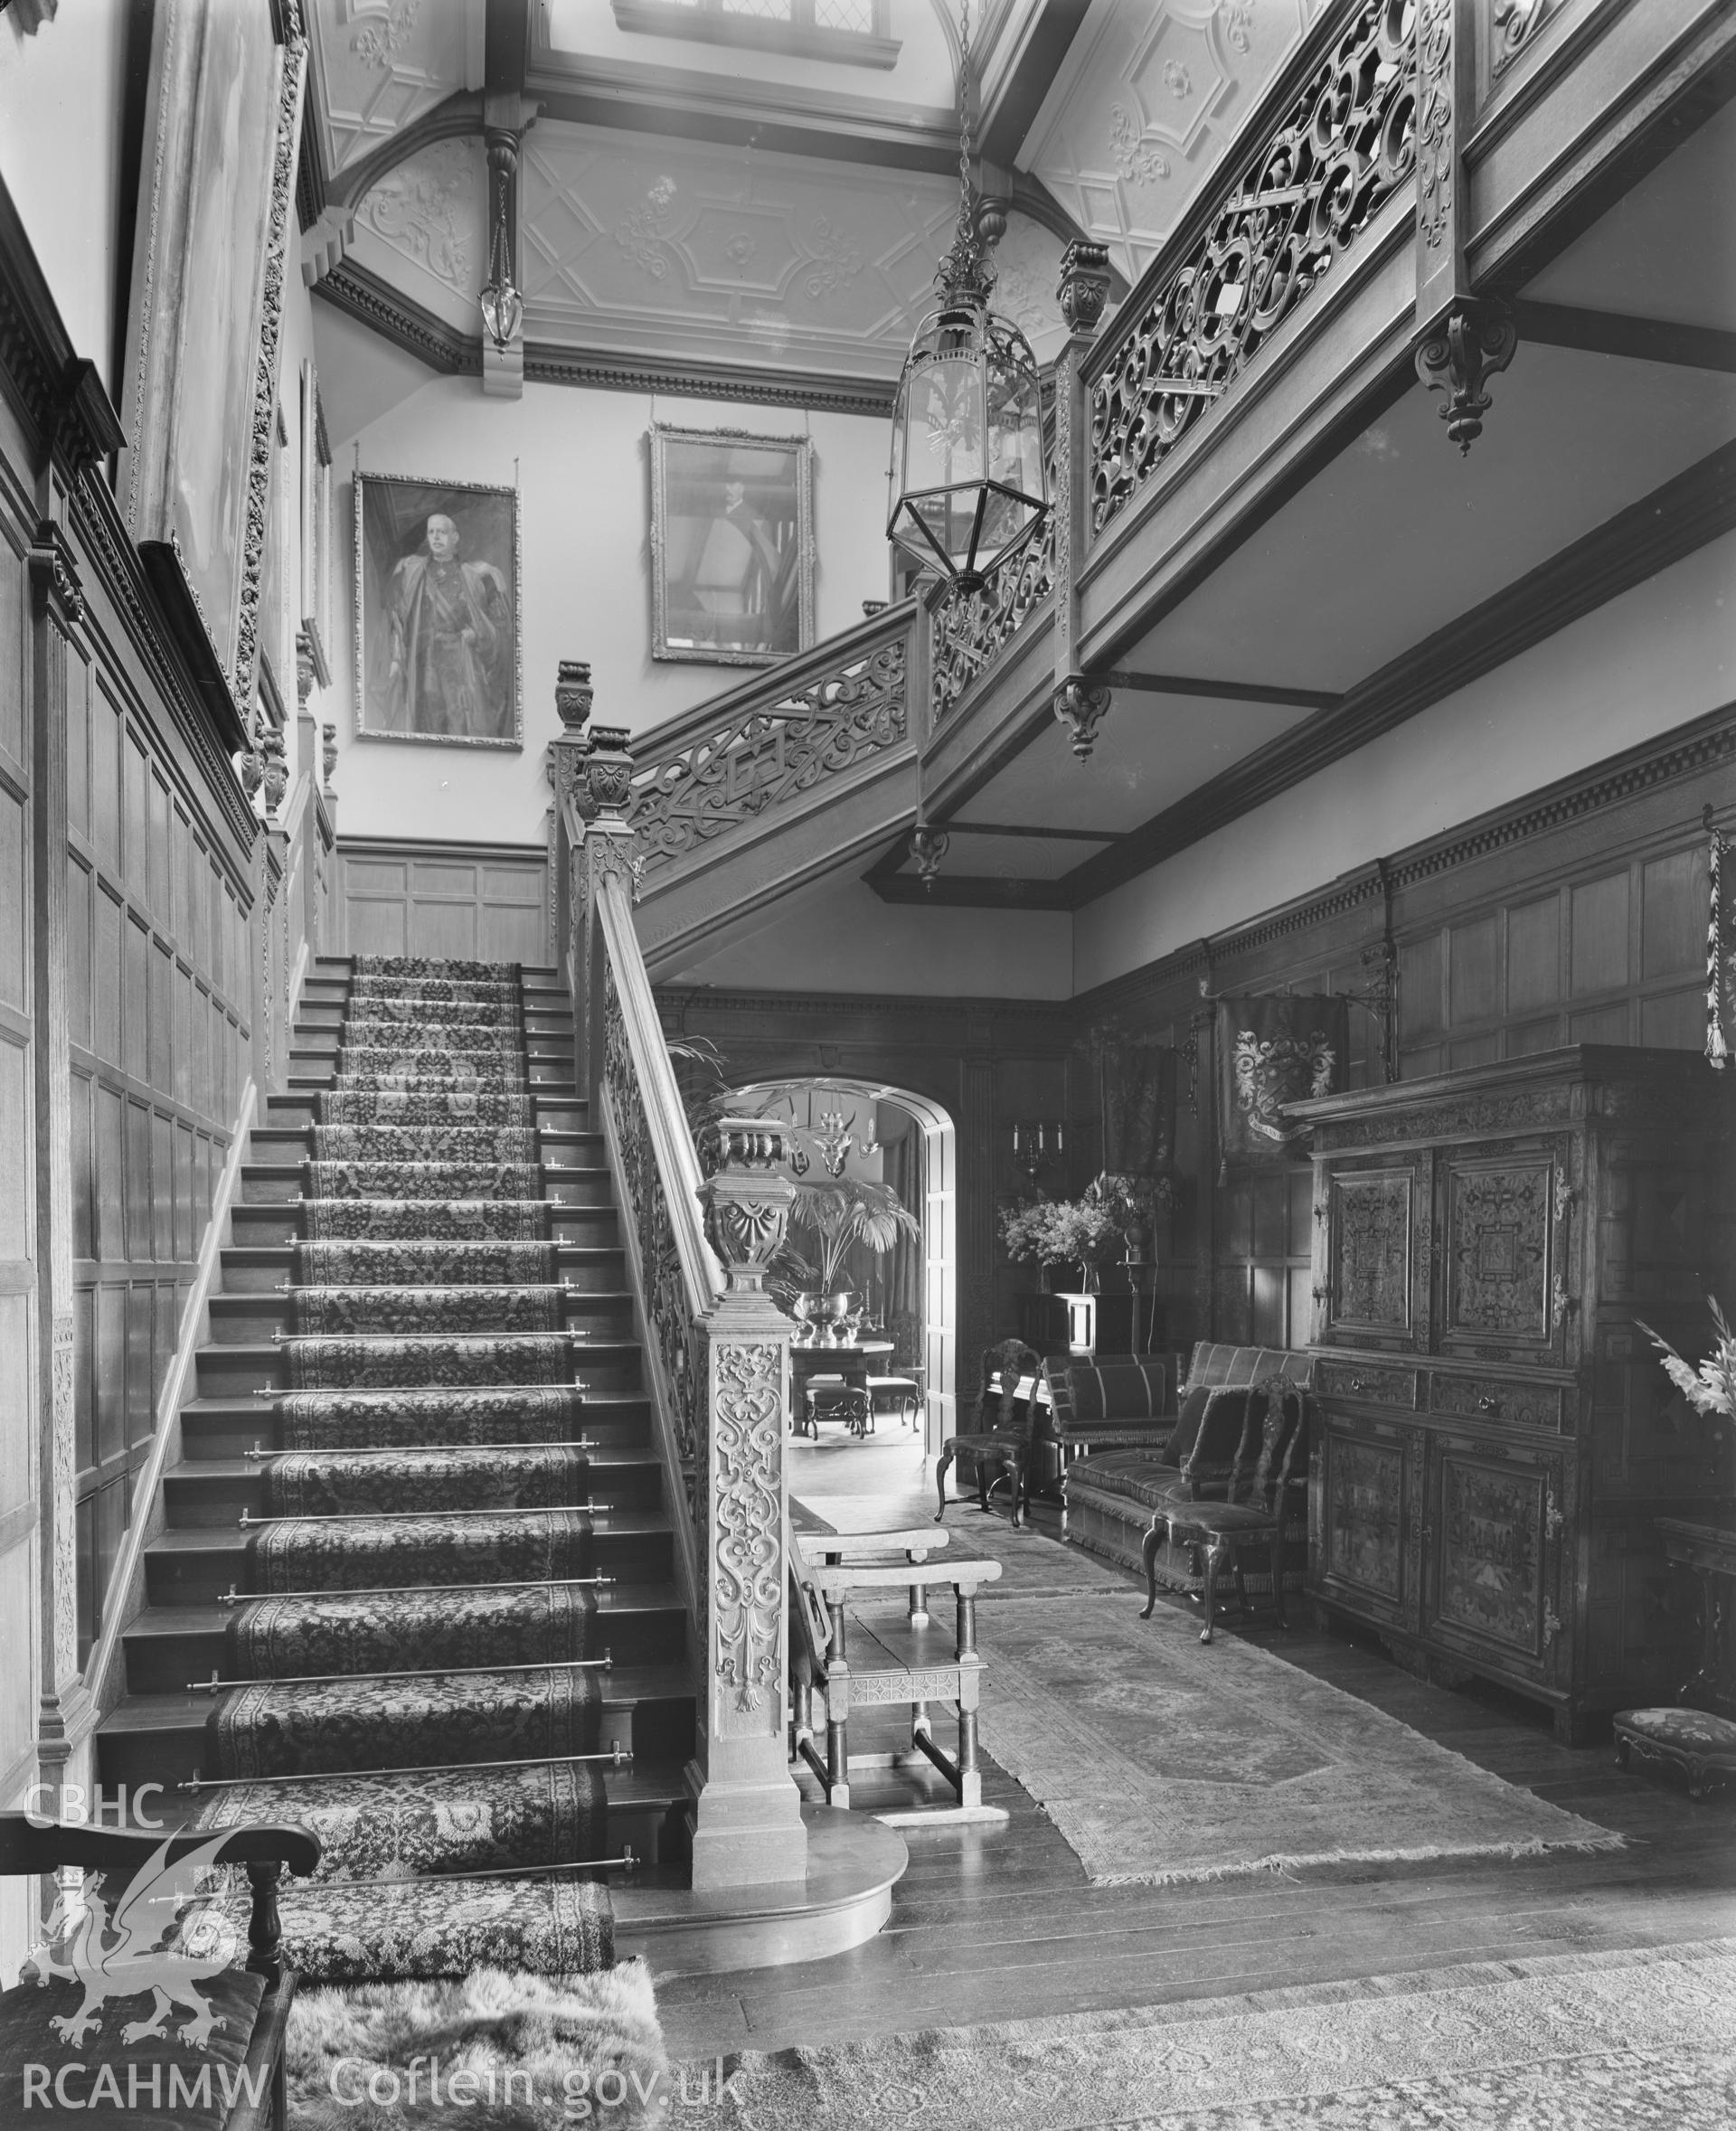 Outsize glass plate negative showing interior view of Coomb House.